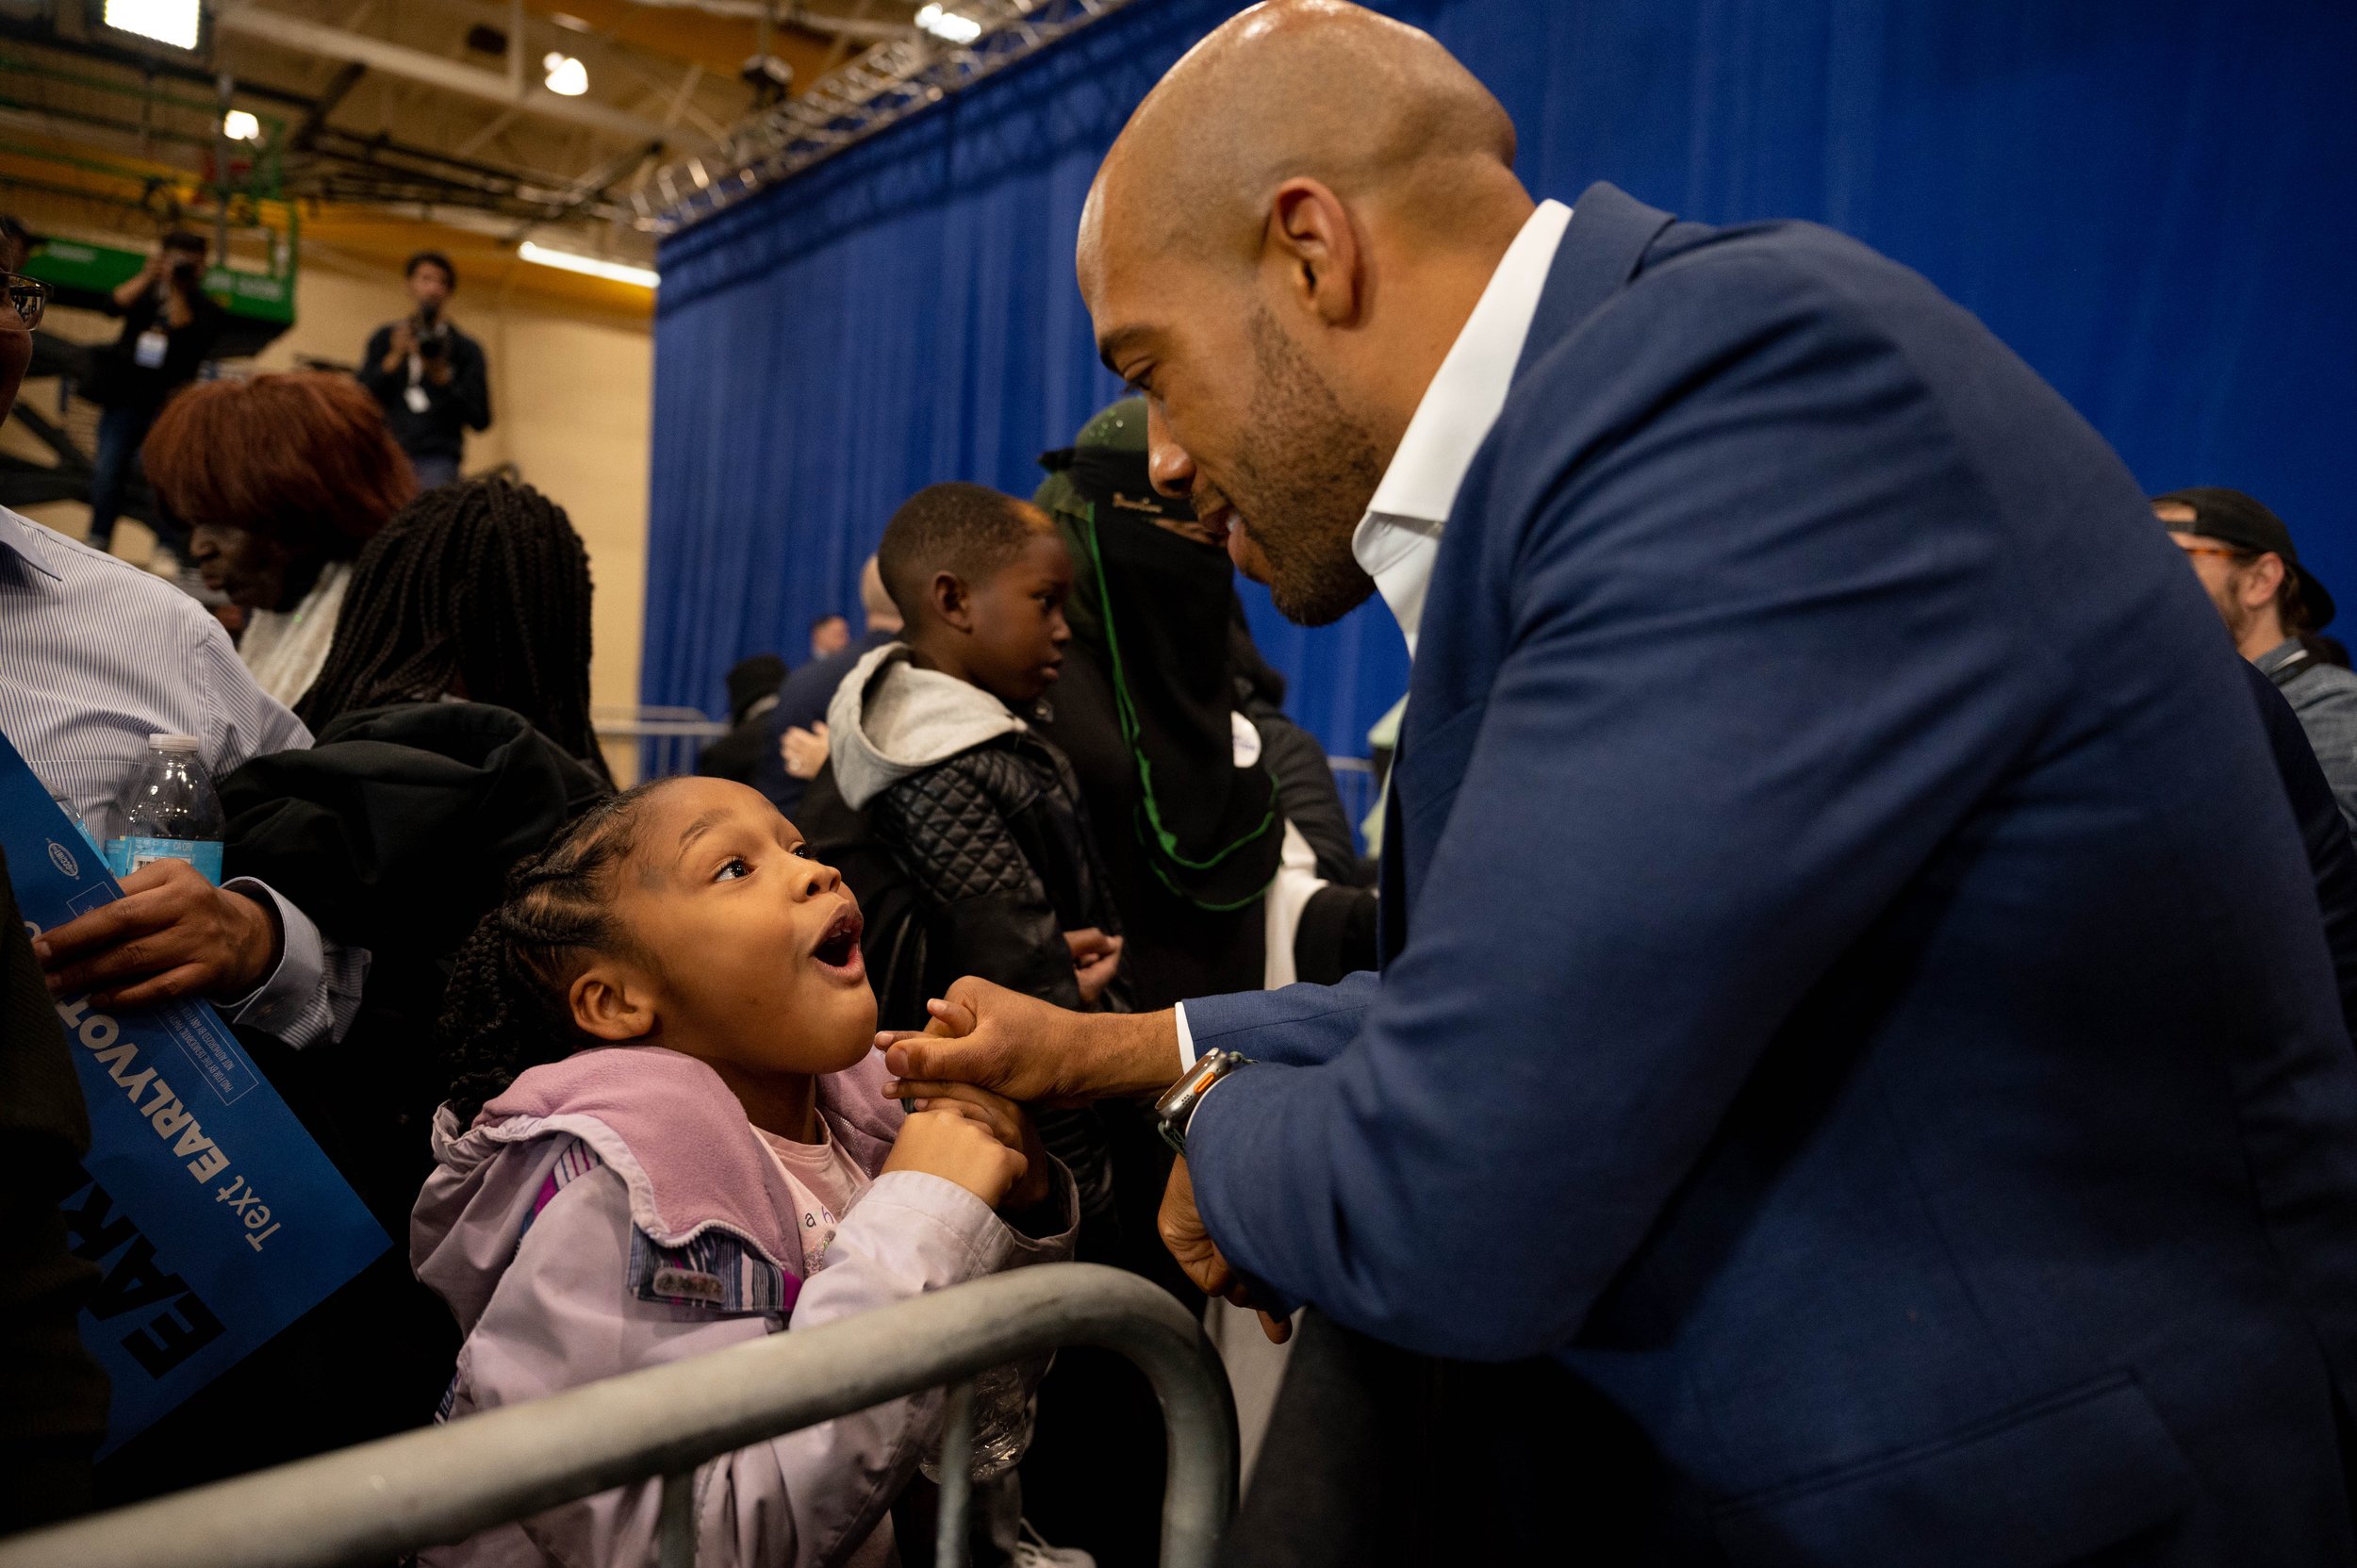 Democratic nominee for U.S. Senate, Lt. Governor Mandela Barnes meets a young supporter at a campaign rally in Wisconsin, 2022